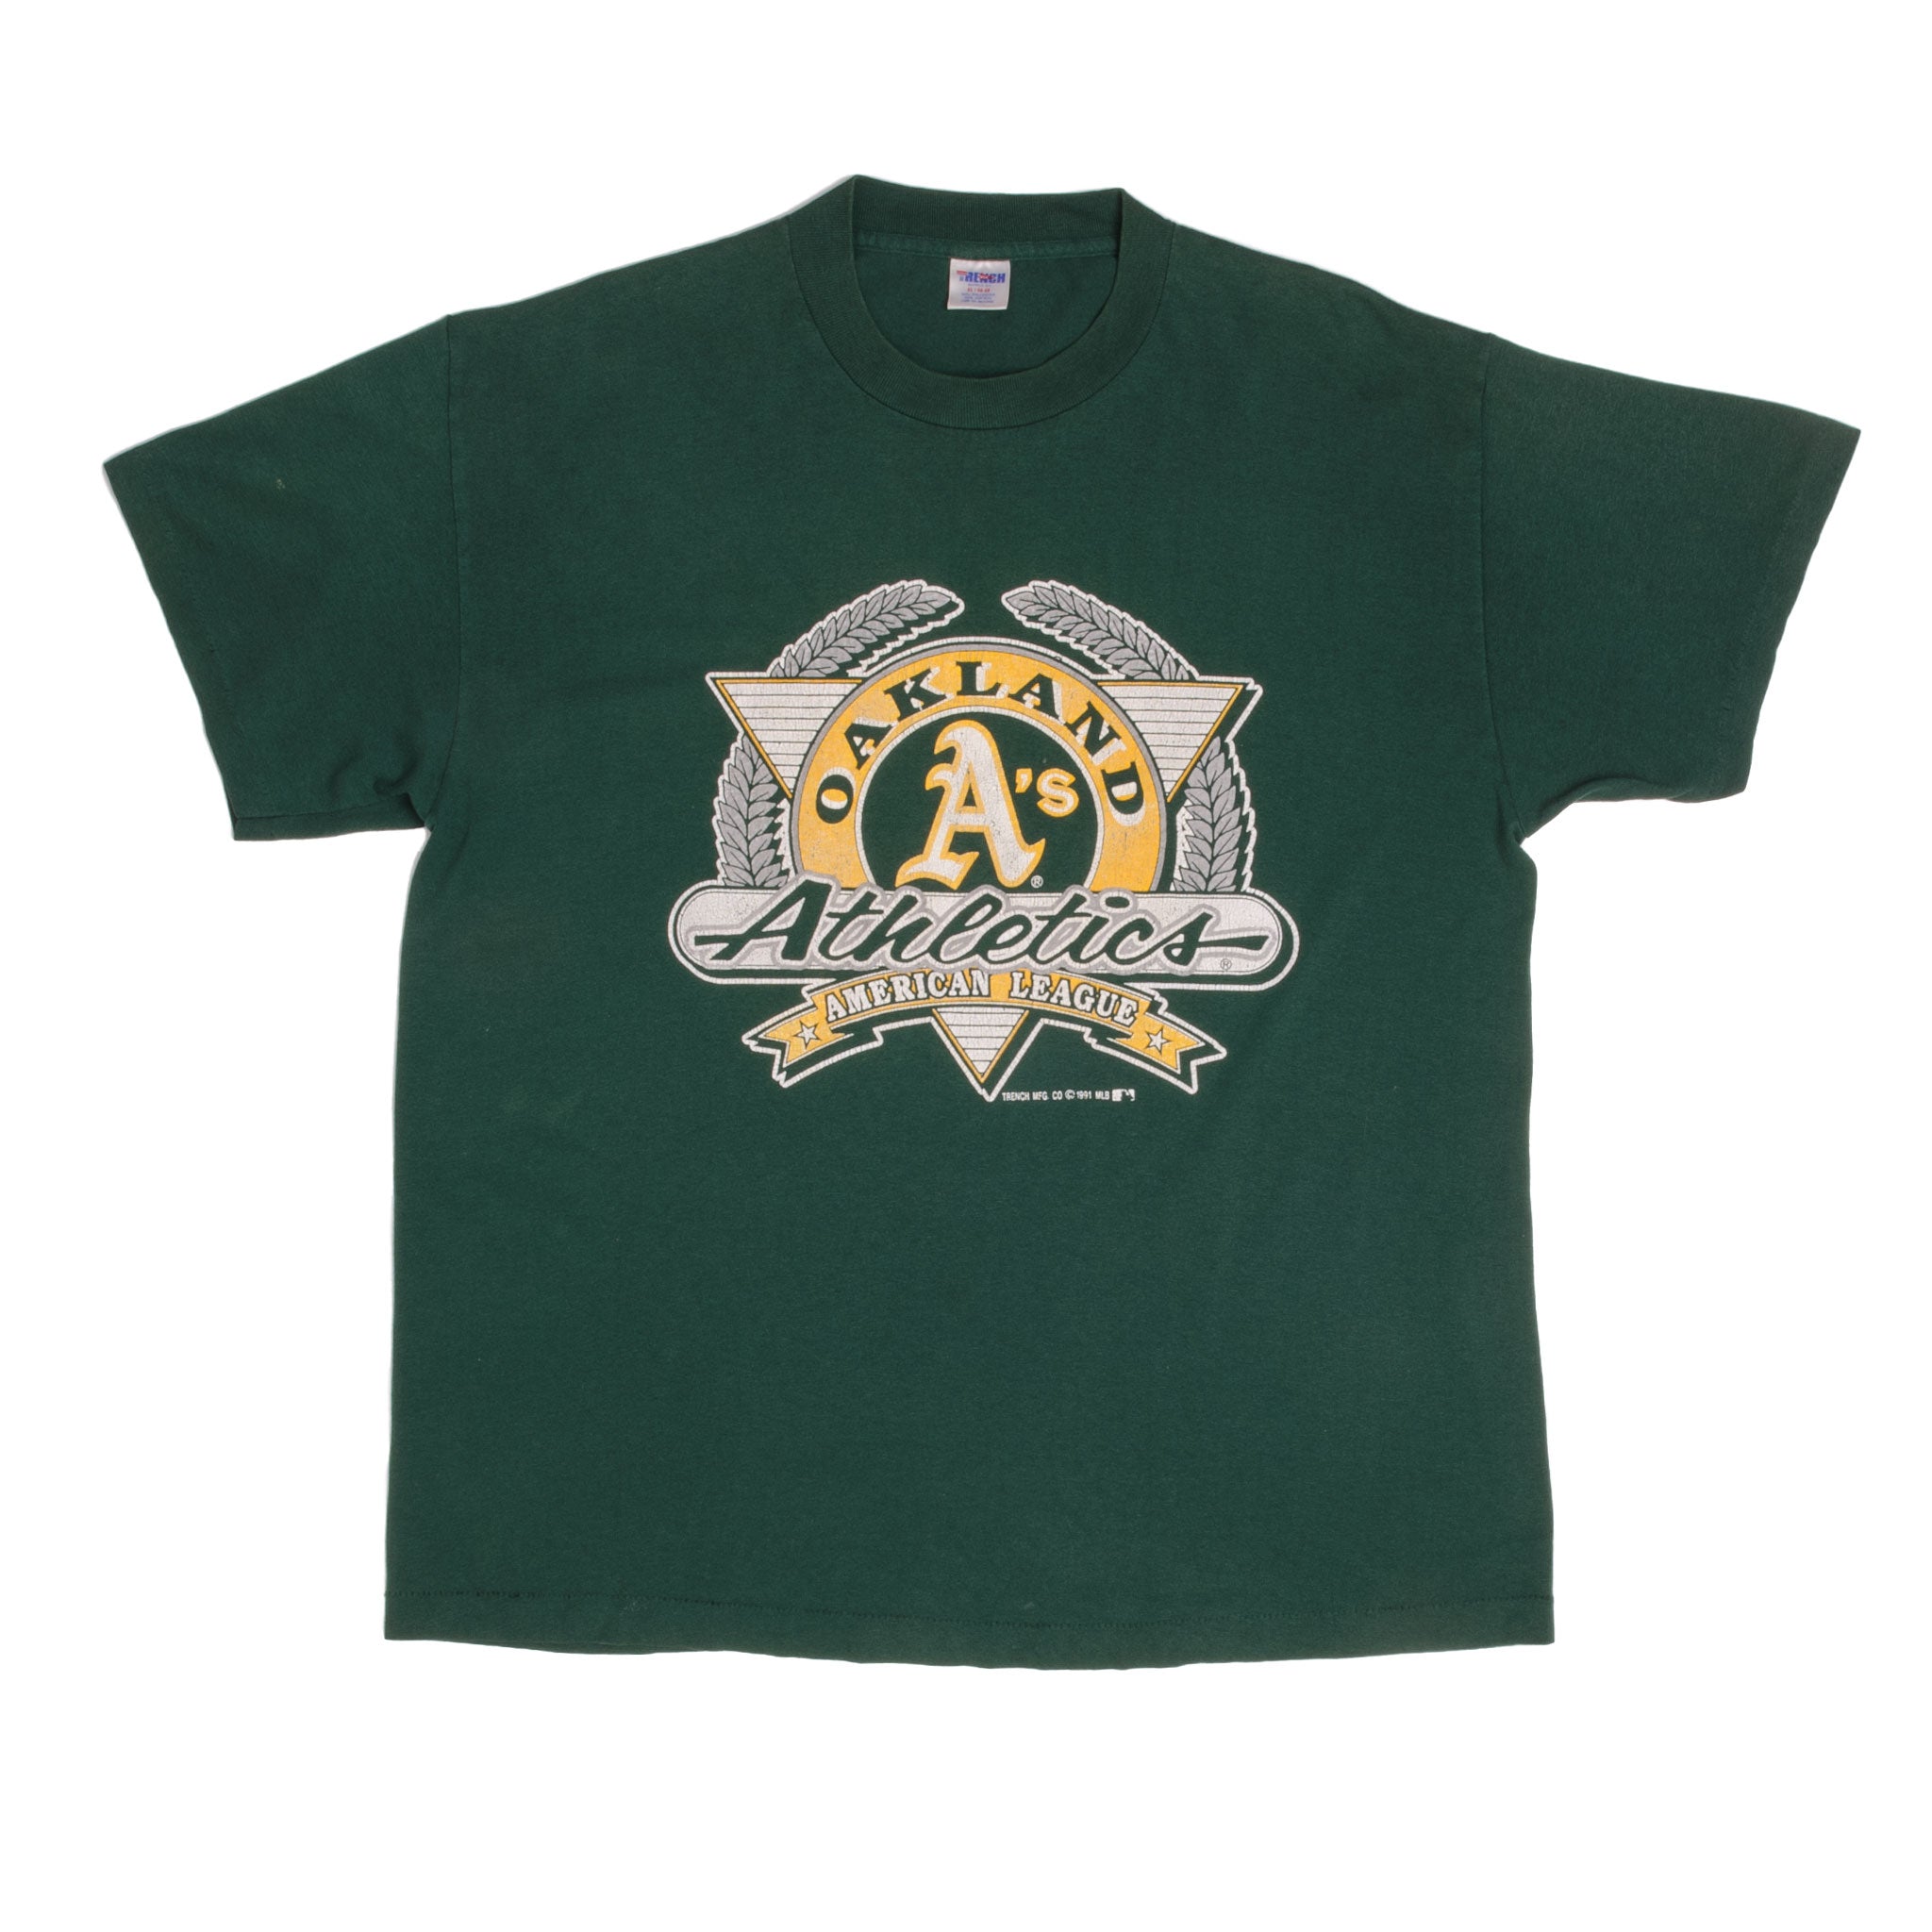 VINTAGE MLB OAKLAND ATHLETICS TEE SHIRT 1992 SIZE XL MADE IN USA